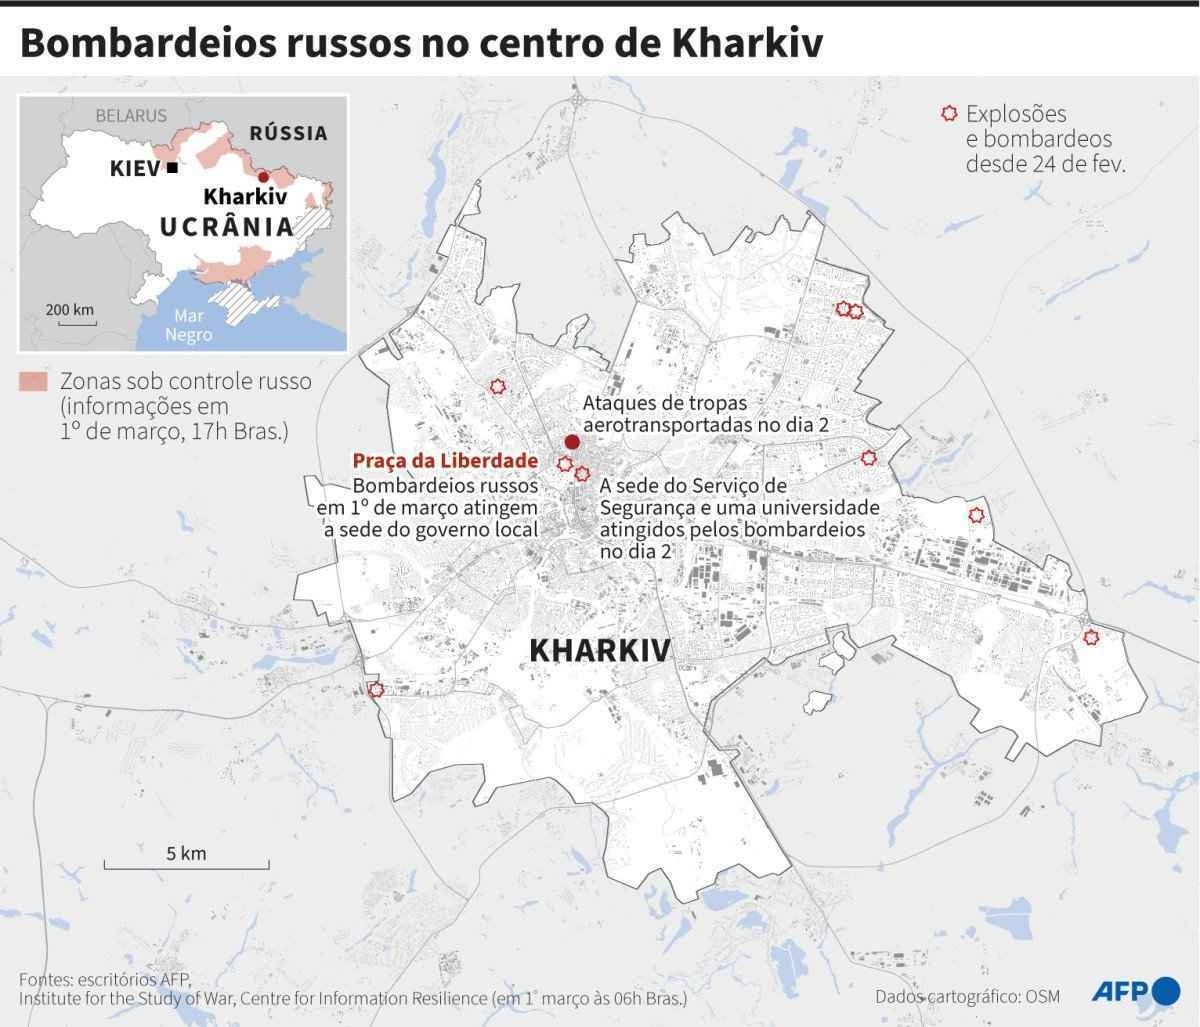 Infographic Wednesday 2/3 - The site of explosions and explosions since February 24 in the center of Kharkiv, the second largest city in Ukraine.  Credit: Simone Malvato, Sophie Ramis, Maria Cecilia Resende, Kenan Ogaard / AFP